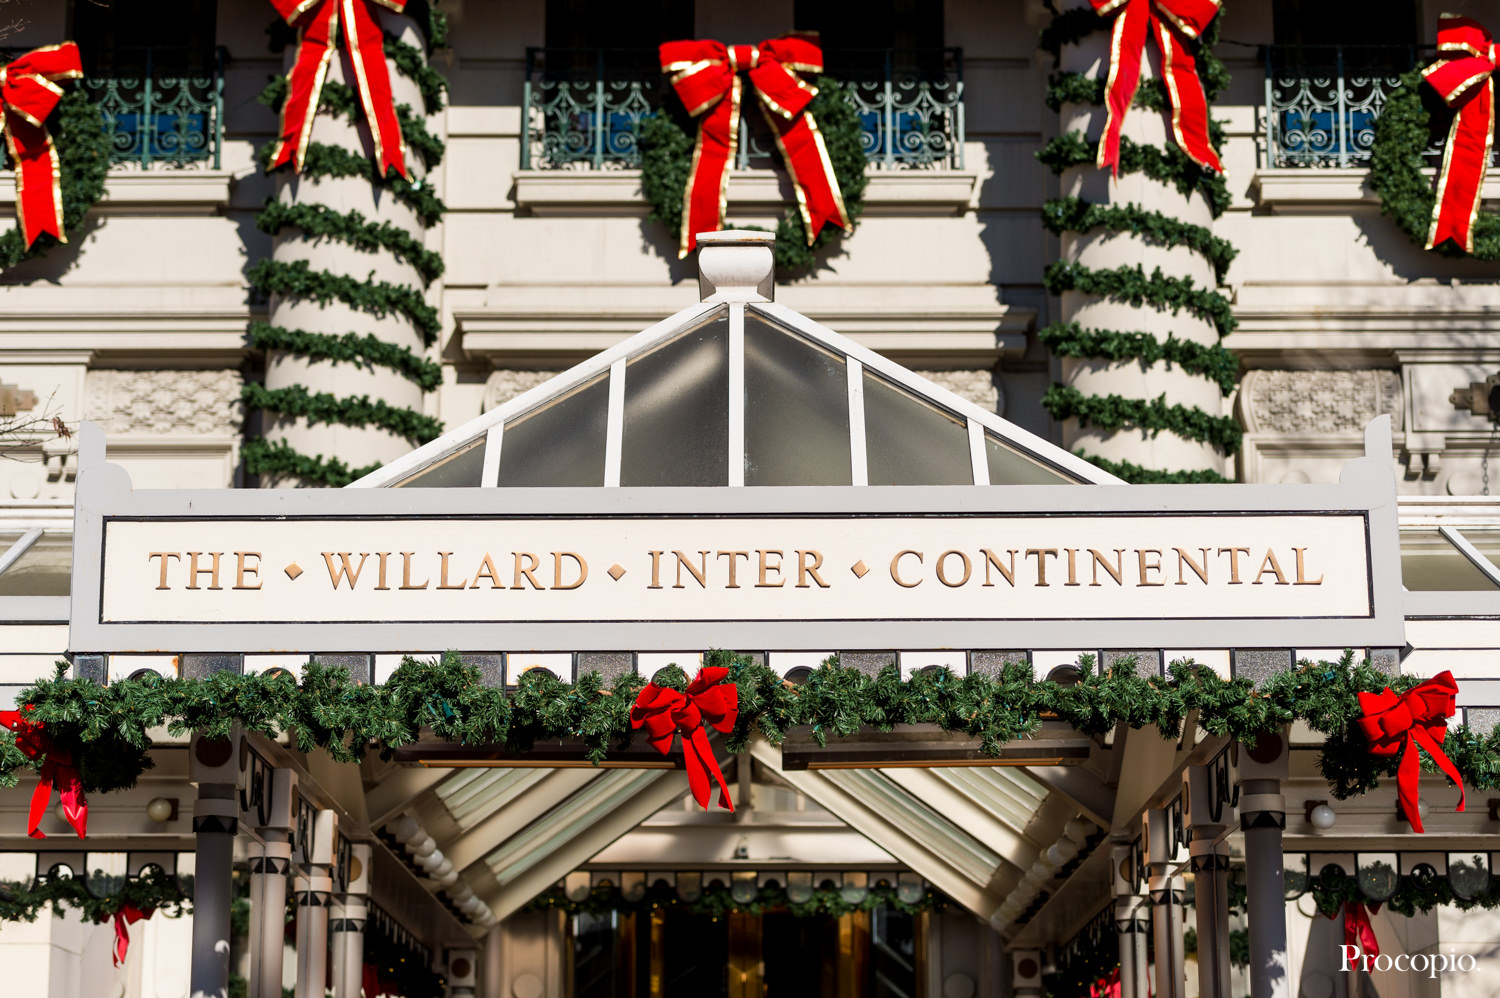 The Willard InterContinental Hotel, Washington DC, St. Dominic’s Catholic Church, Christmas wedding, winter wedding, New Year’s Wedding, wedding colors are red, green, gold, pink, blush, and white, church ceremony, indoor reception, musician, Procopio Photography, best top Washington DC photographer, best top Maryland photographer, best top Virginia photographer, best top DMV photographer, best top wedding photographer, best top commercial photographer, best top portrait photographer, best top boudoir photographer, modern fine art portraits, dramatic, unique, different, bold, editorial, photojournalism, award winning photographer, published photographer, memorable images, be different, stand out